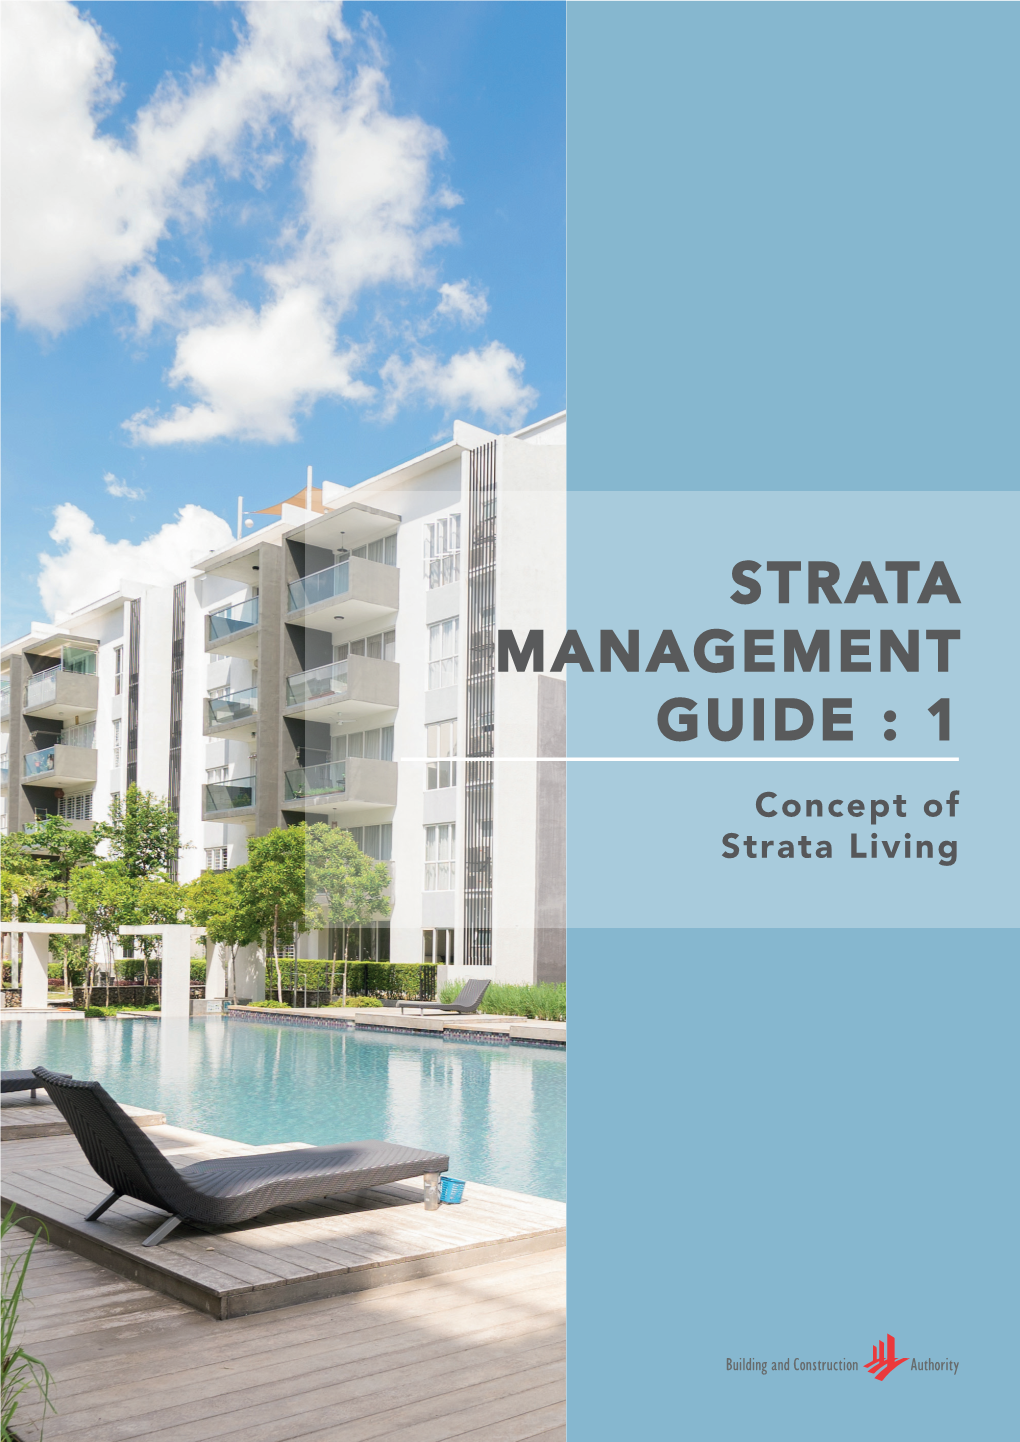 Strata Management Guide 1: Concept of Living